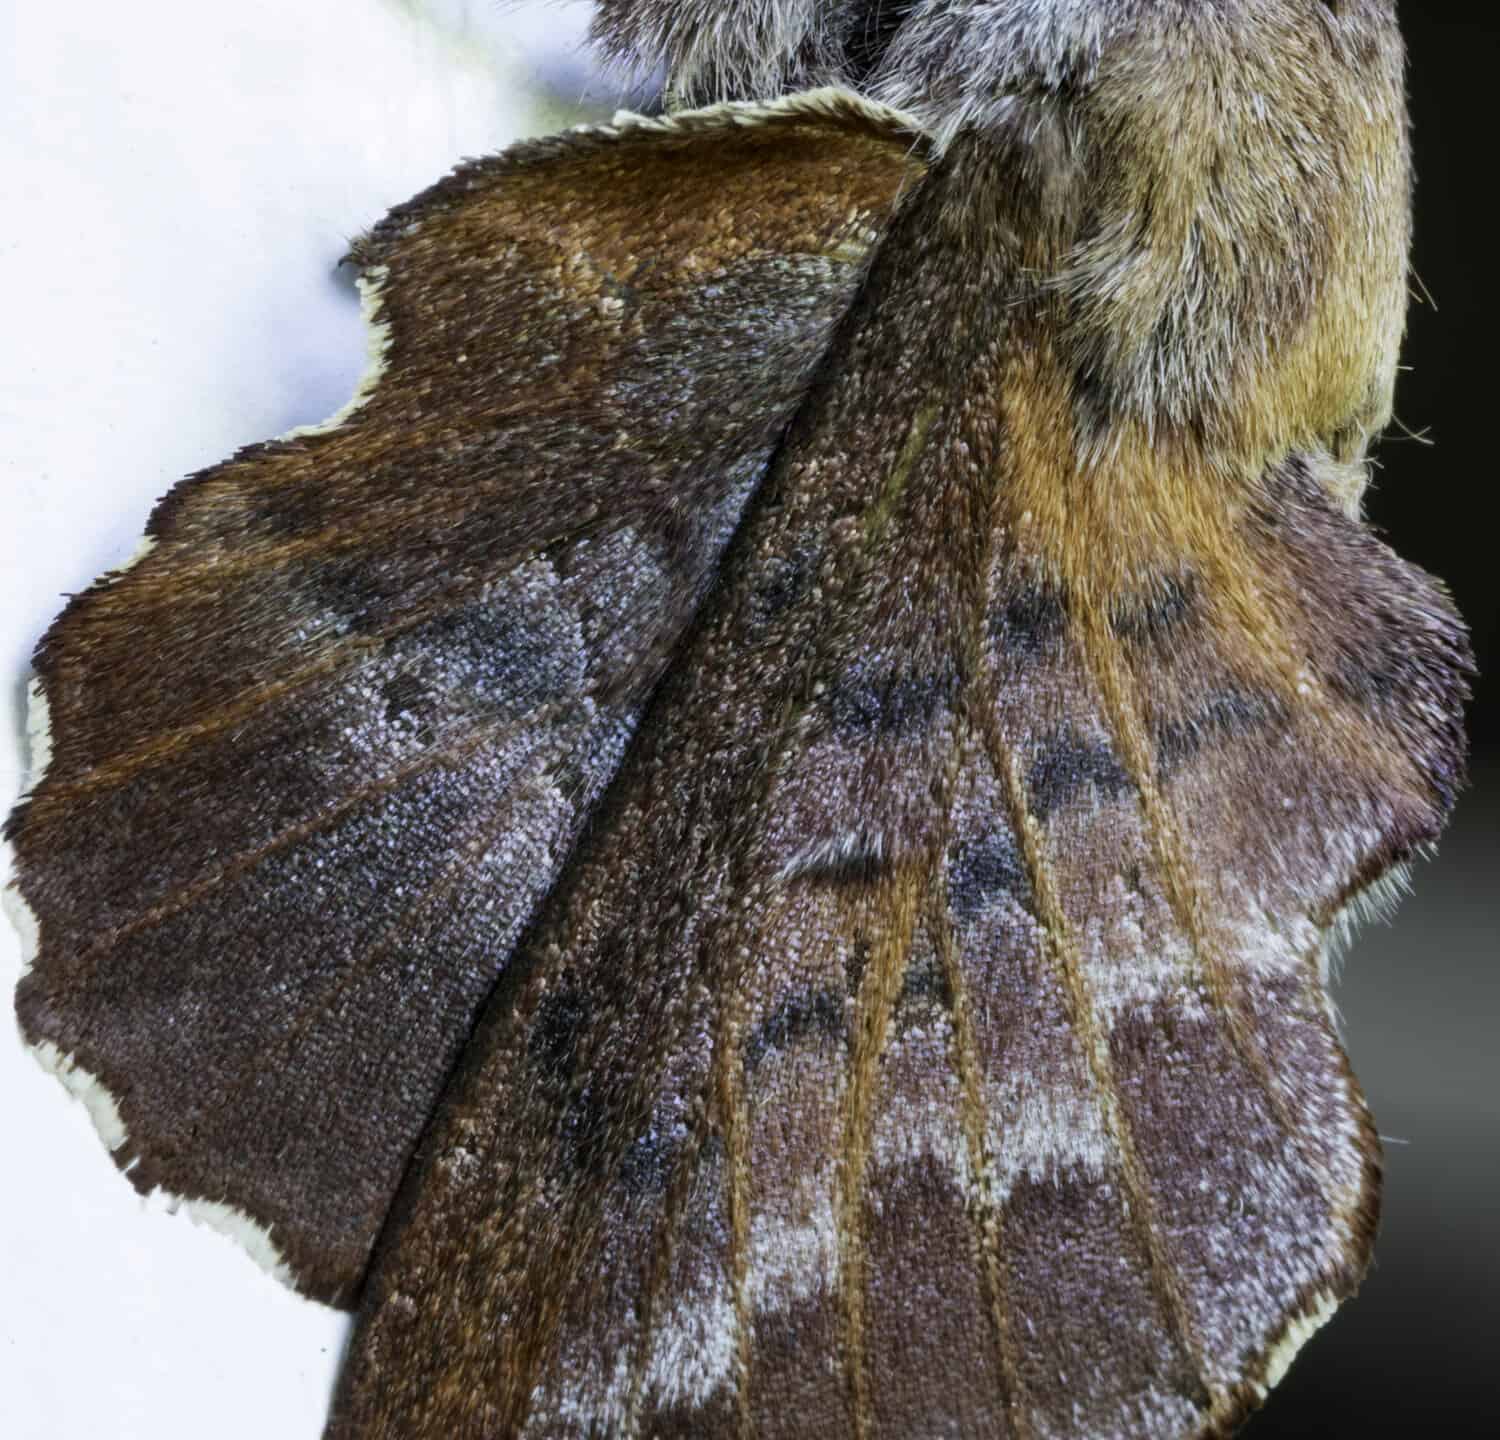 American Lappet Moth - Looks like a leaf resting on white